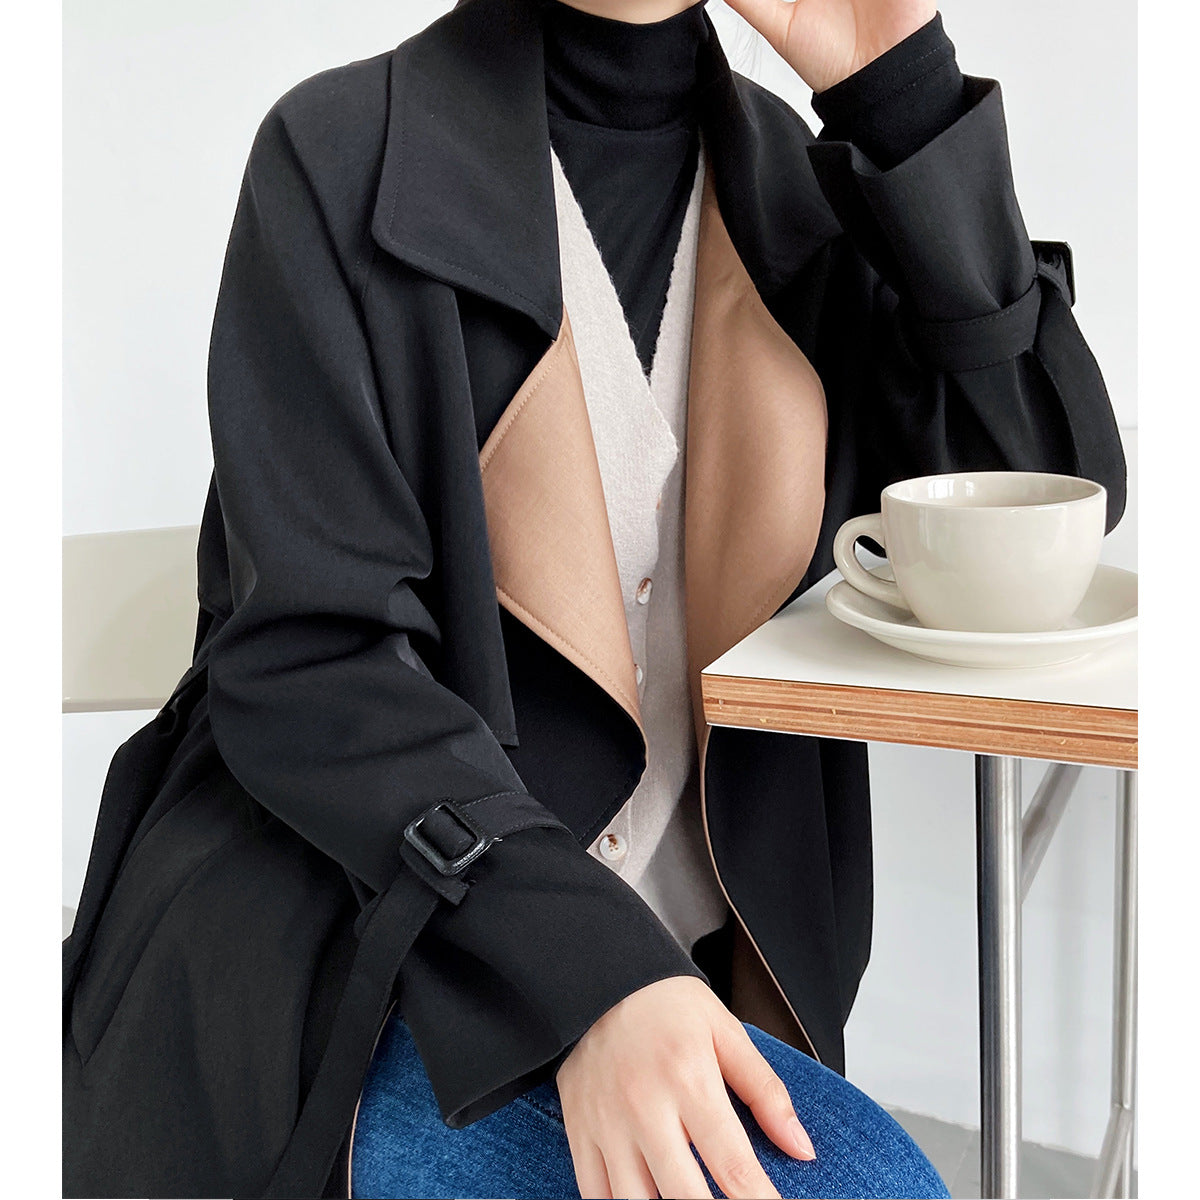 Elegant Stitching Contrast Color Trench Coat Women Mid-Length over-the-Knee Large Lapel Fashion Waist-Controlled Overcoat